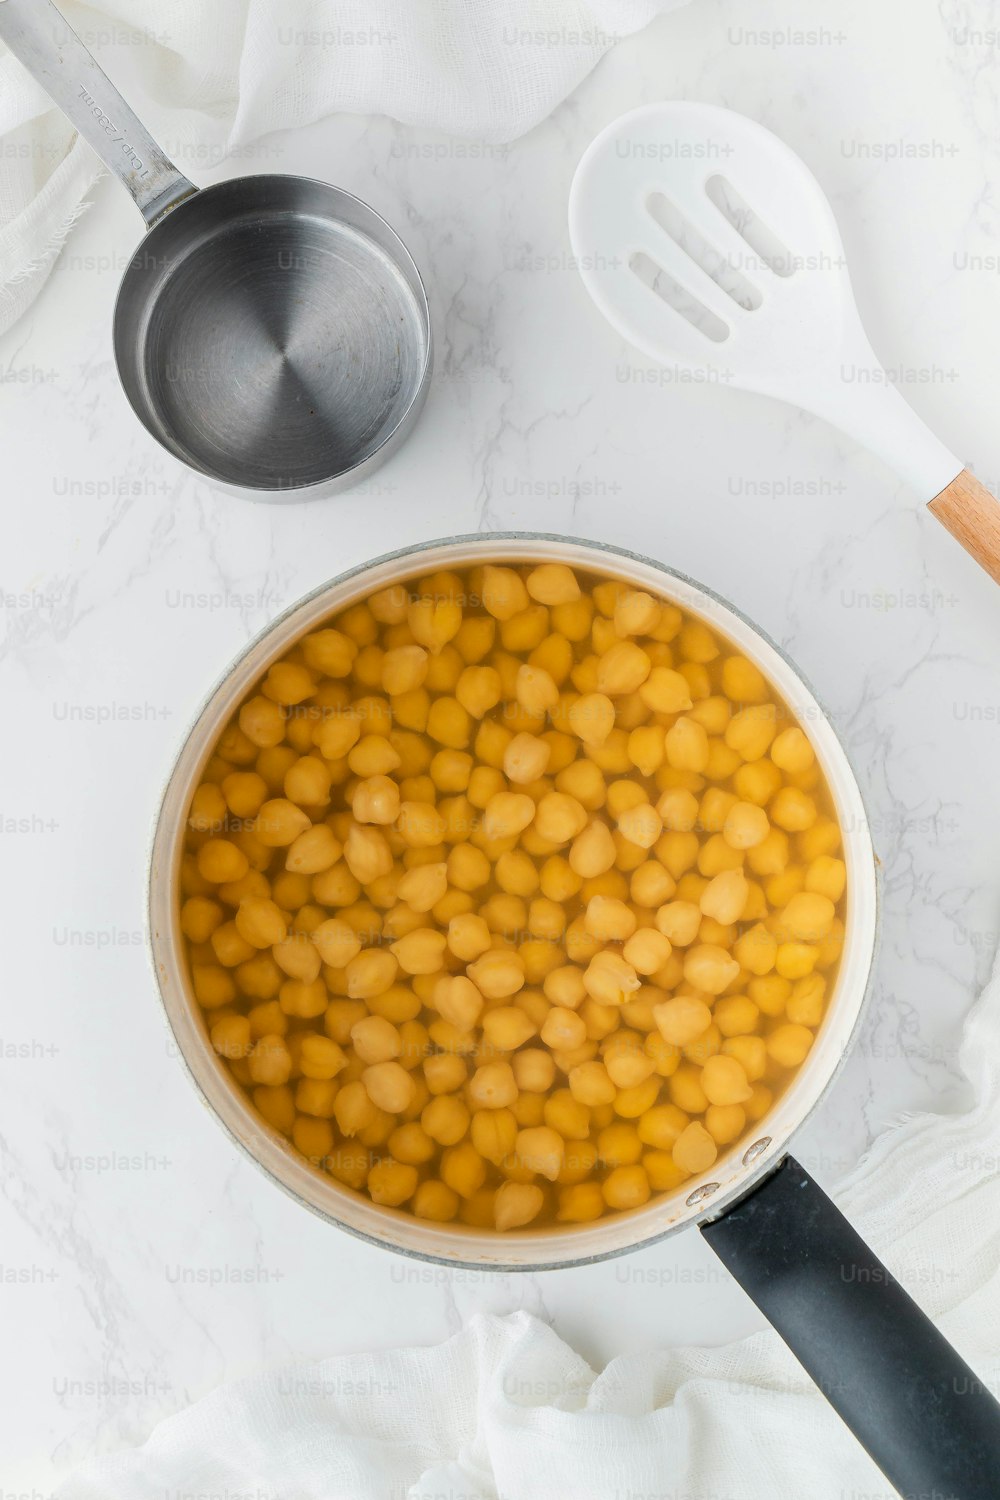 a pan filled with chickpeas next to a spatula